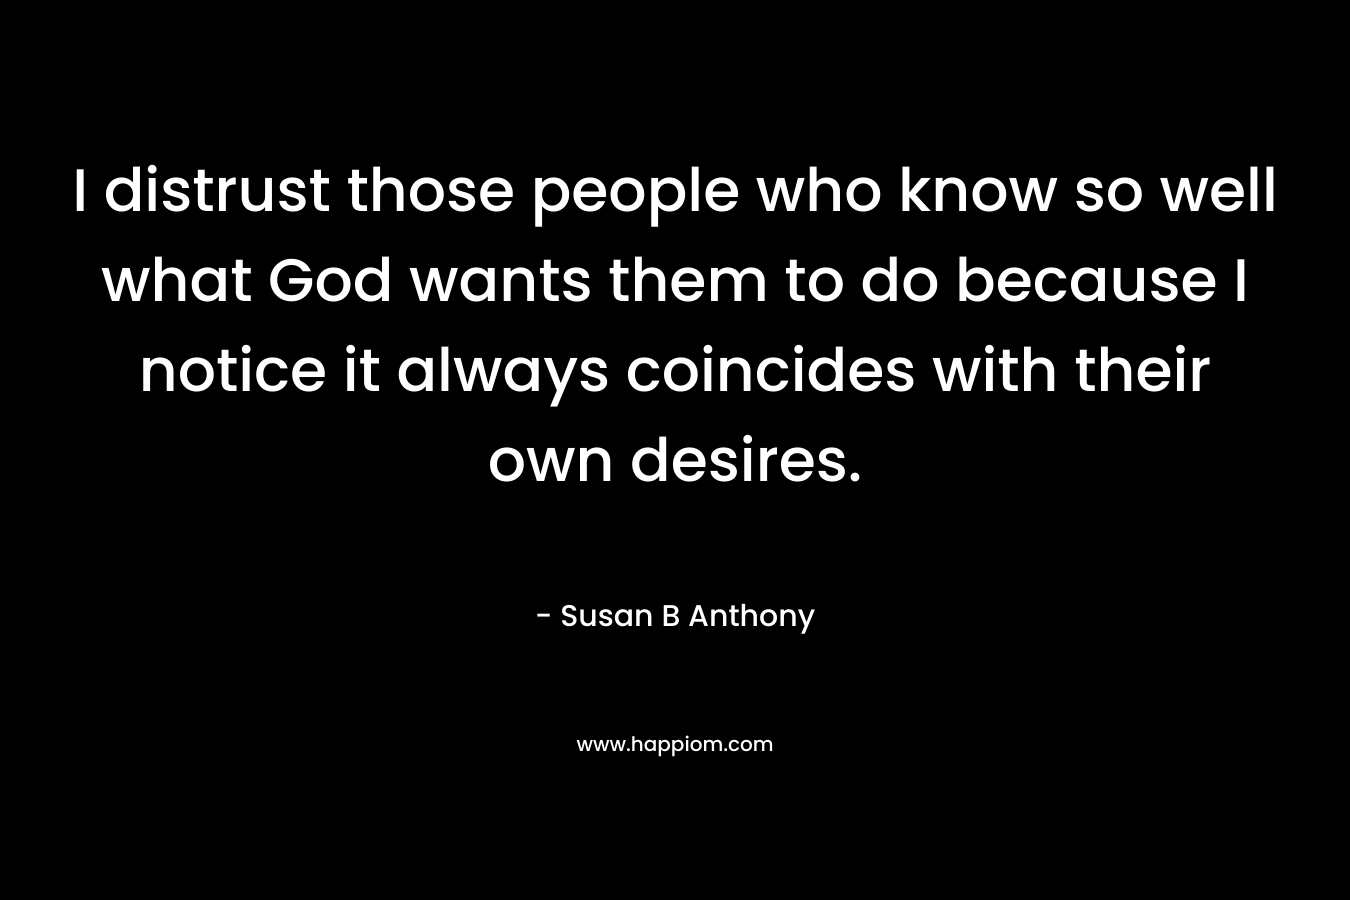 I distrust those people who know so well what God wants them to do because I notice it always coincides with their own desires. – Susan B Anthony